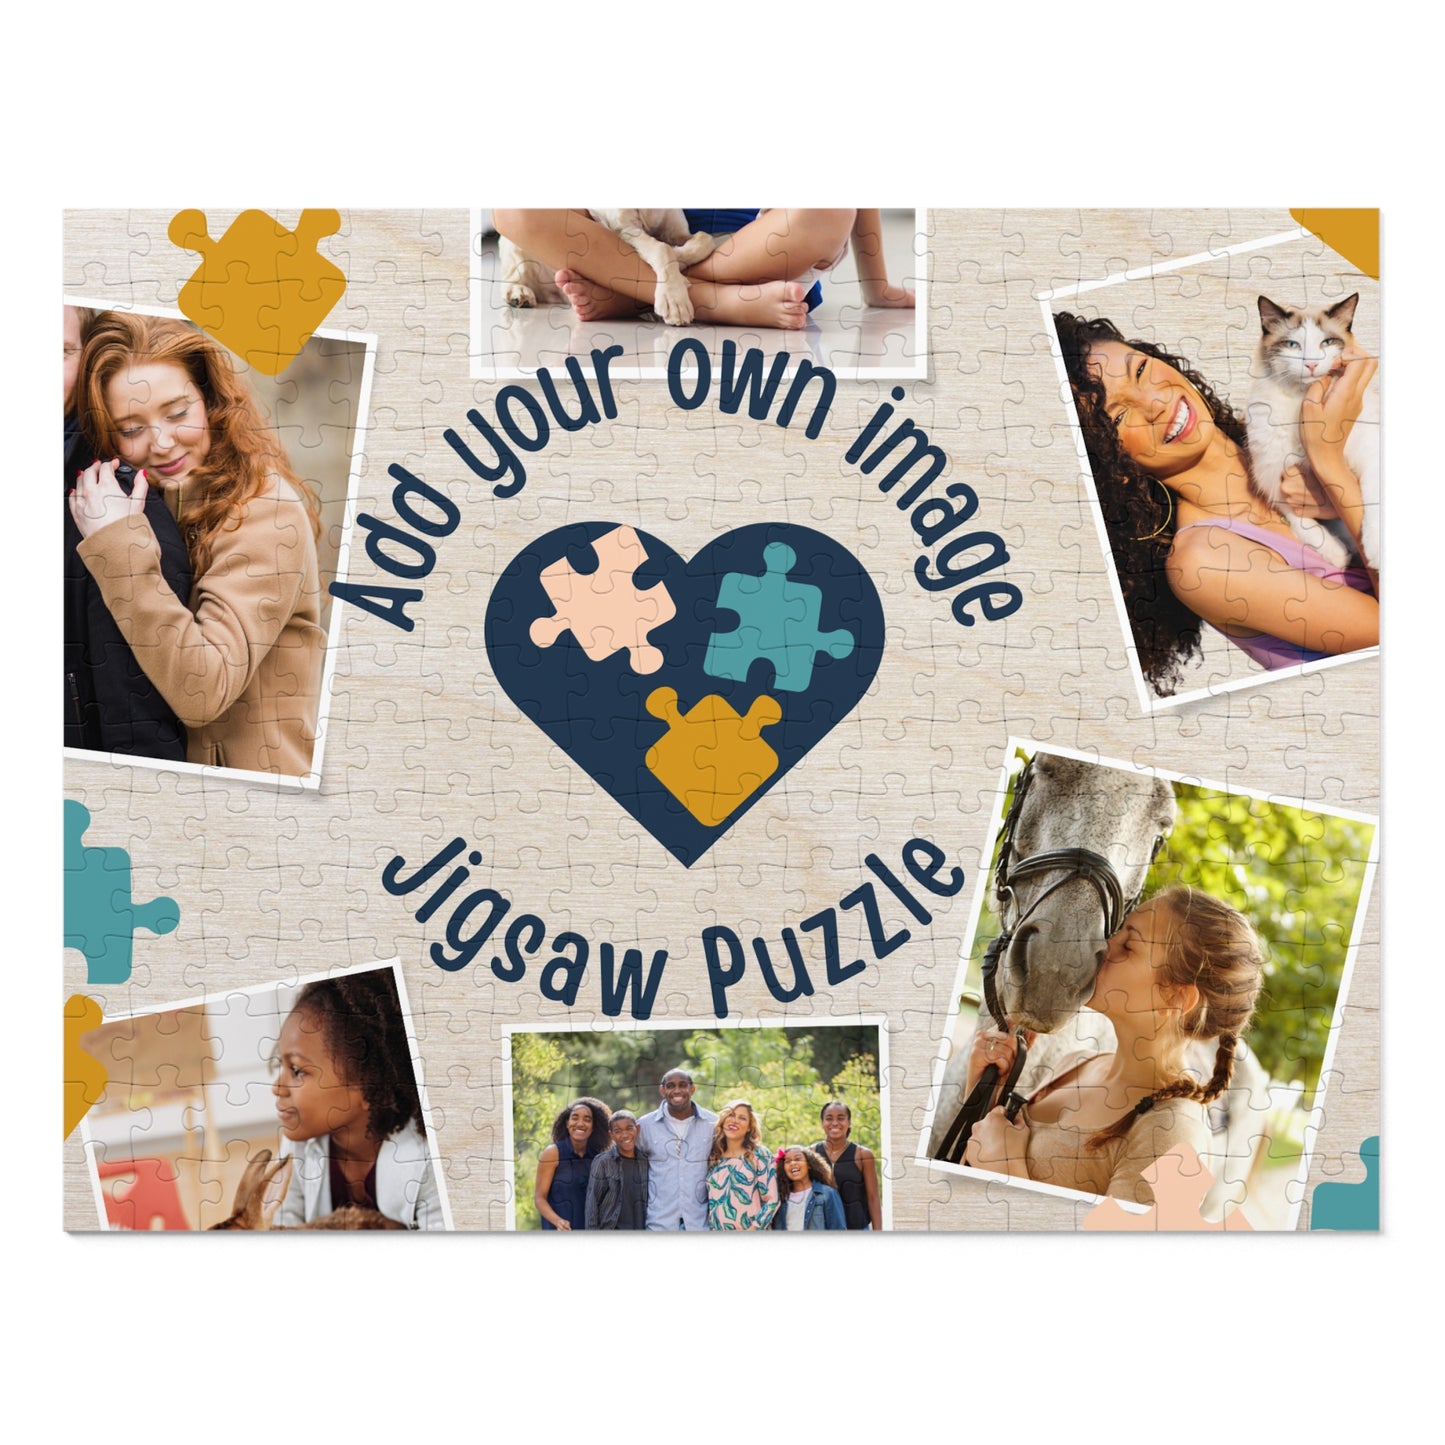 Personalizable Jigsaw Puzzle - Add Your Own Photo (30, 110, 252, 500,1000-Piece)